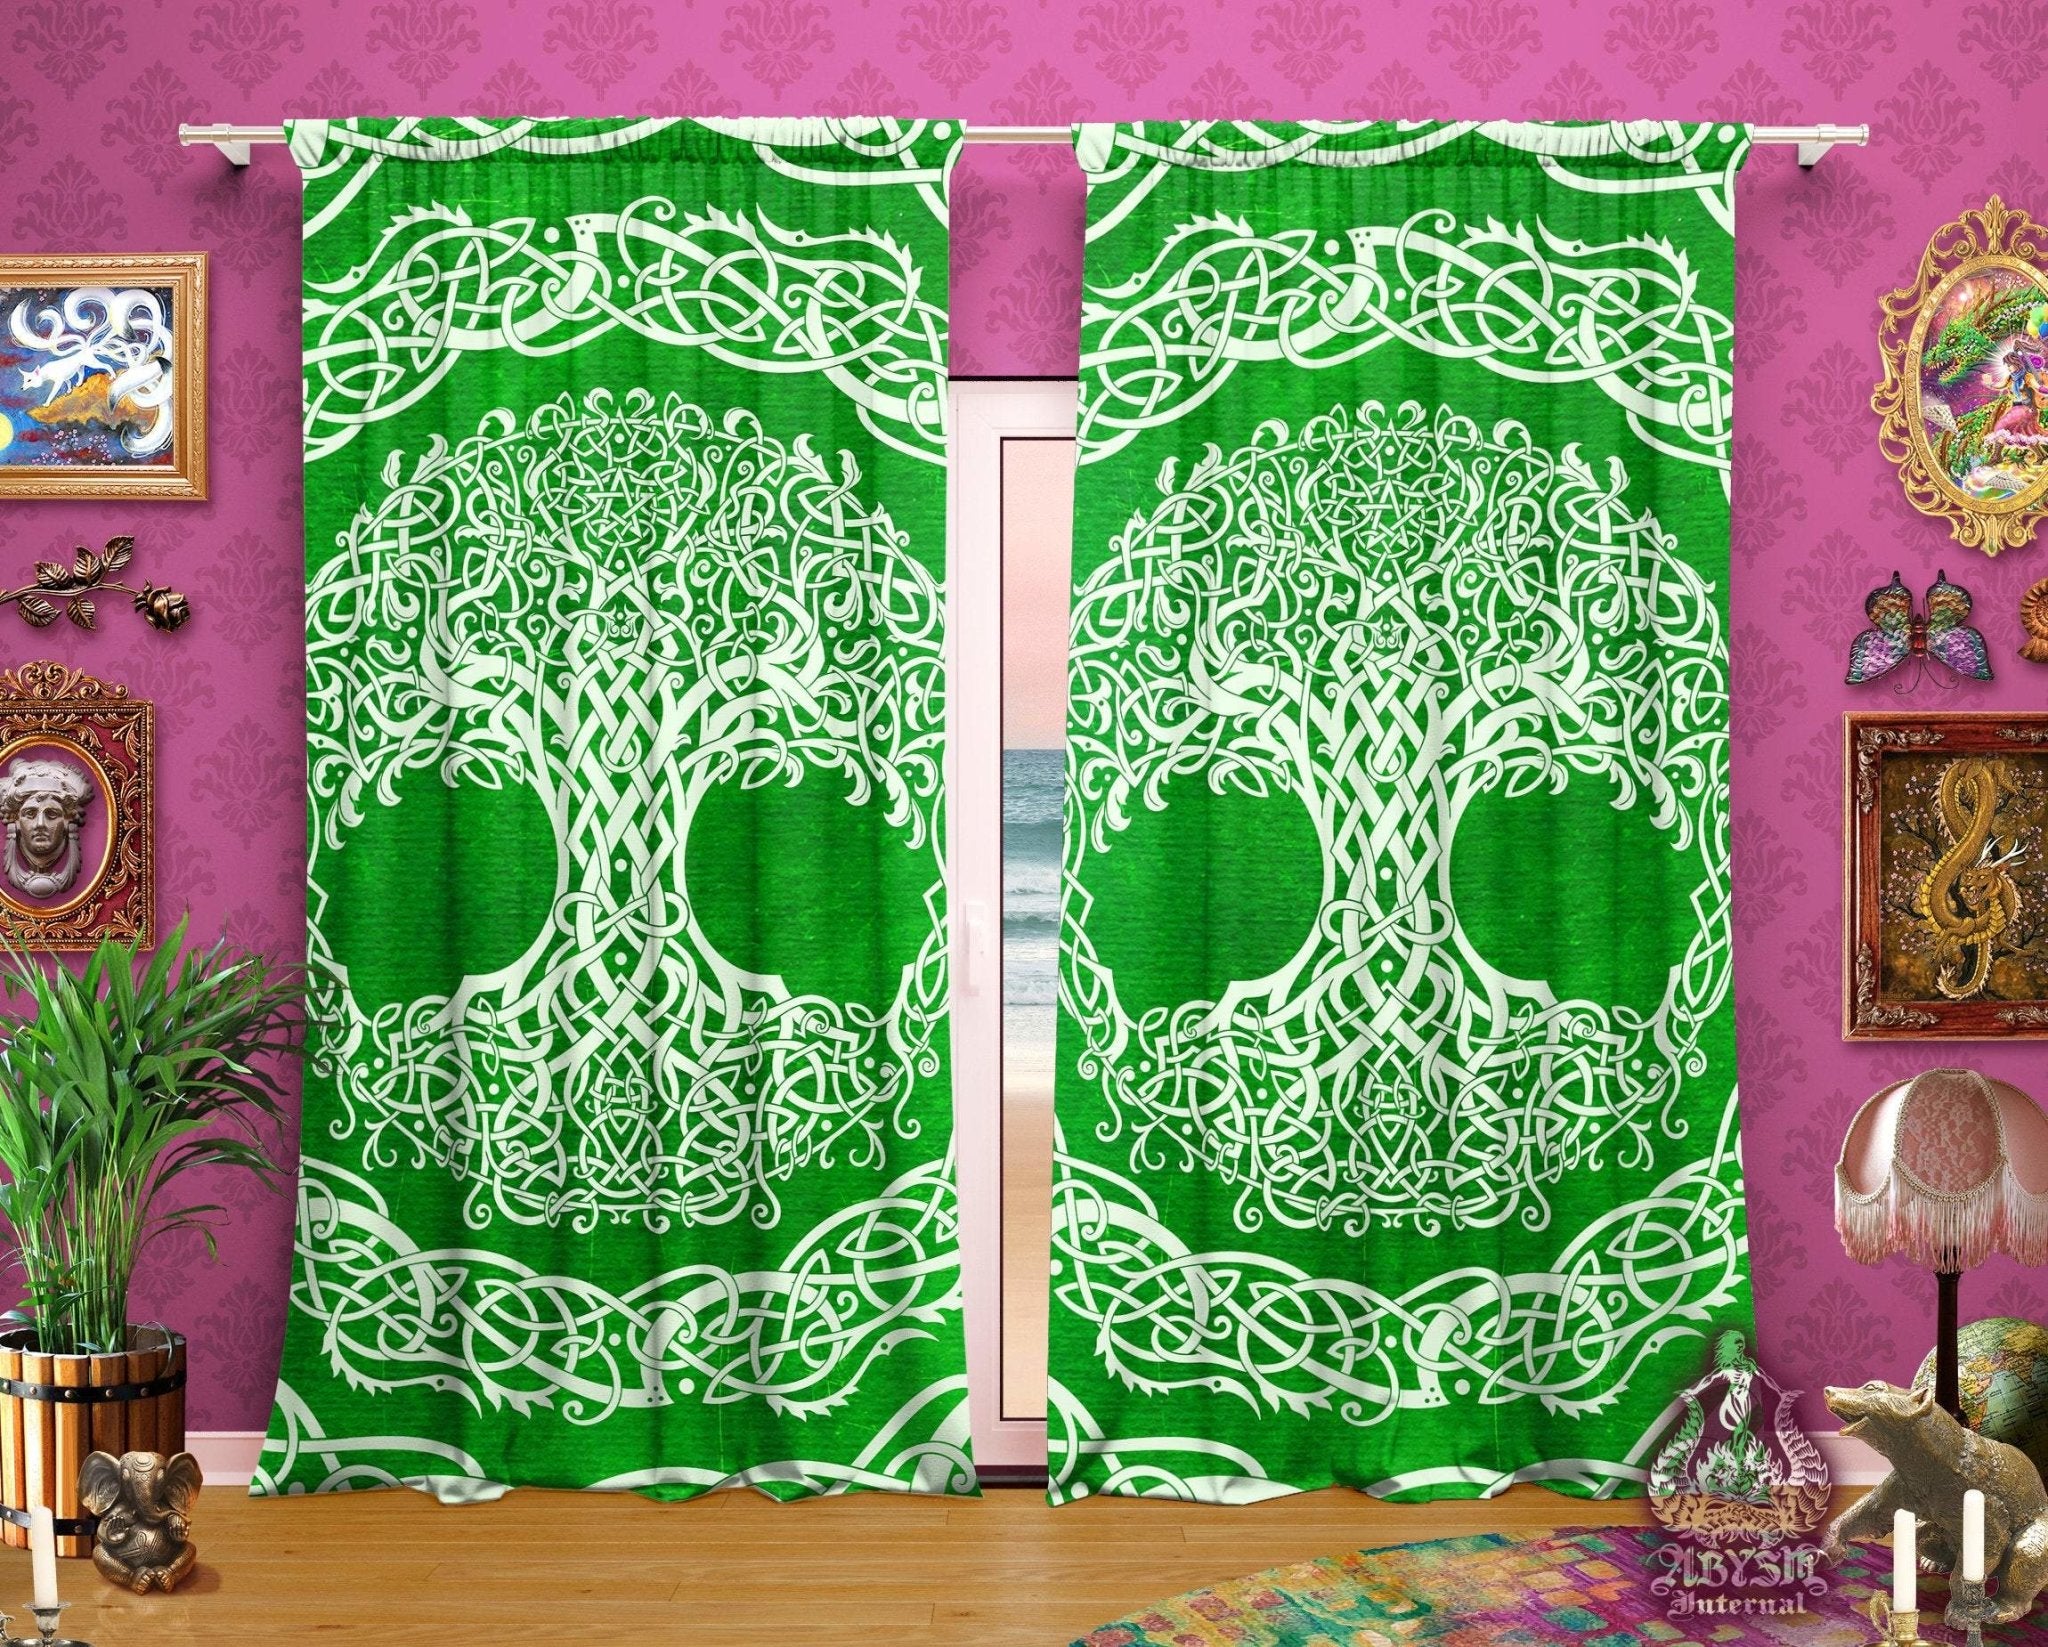 Pagan Blackout Curtains, Long Window Panels, Tree of Life, Celtic Knot, Witchy Room Decor, Art Print, Funky and Eclectic Home Decor - Green - Abysm Internal